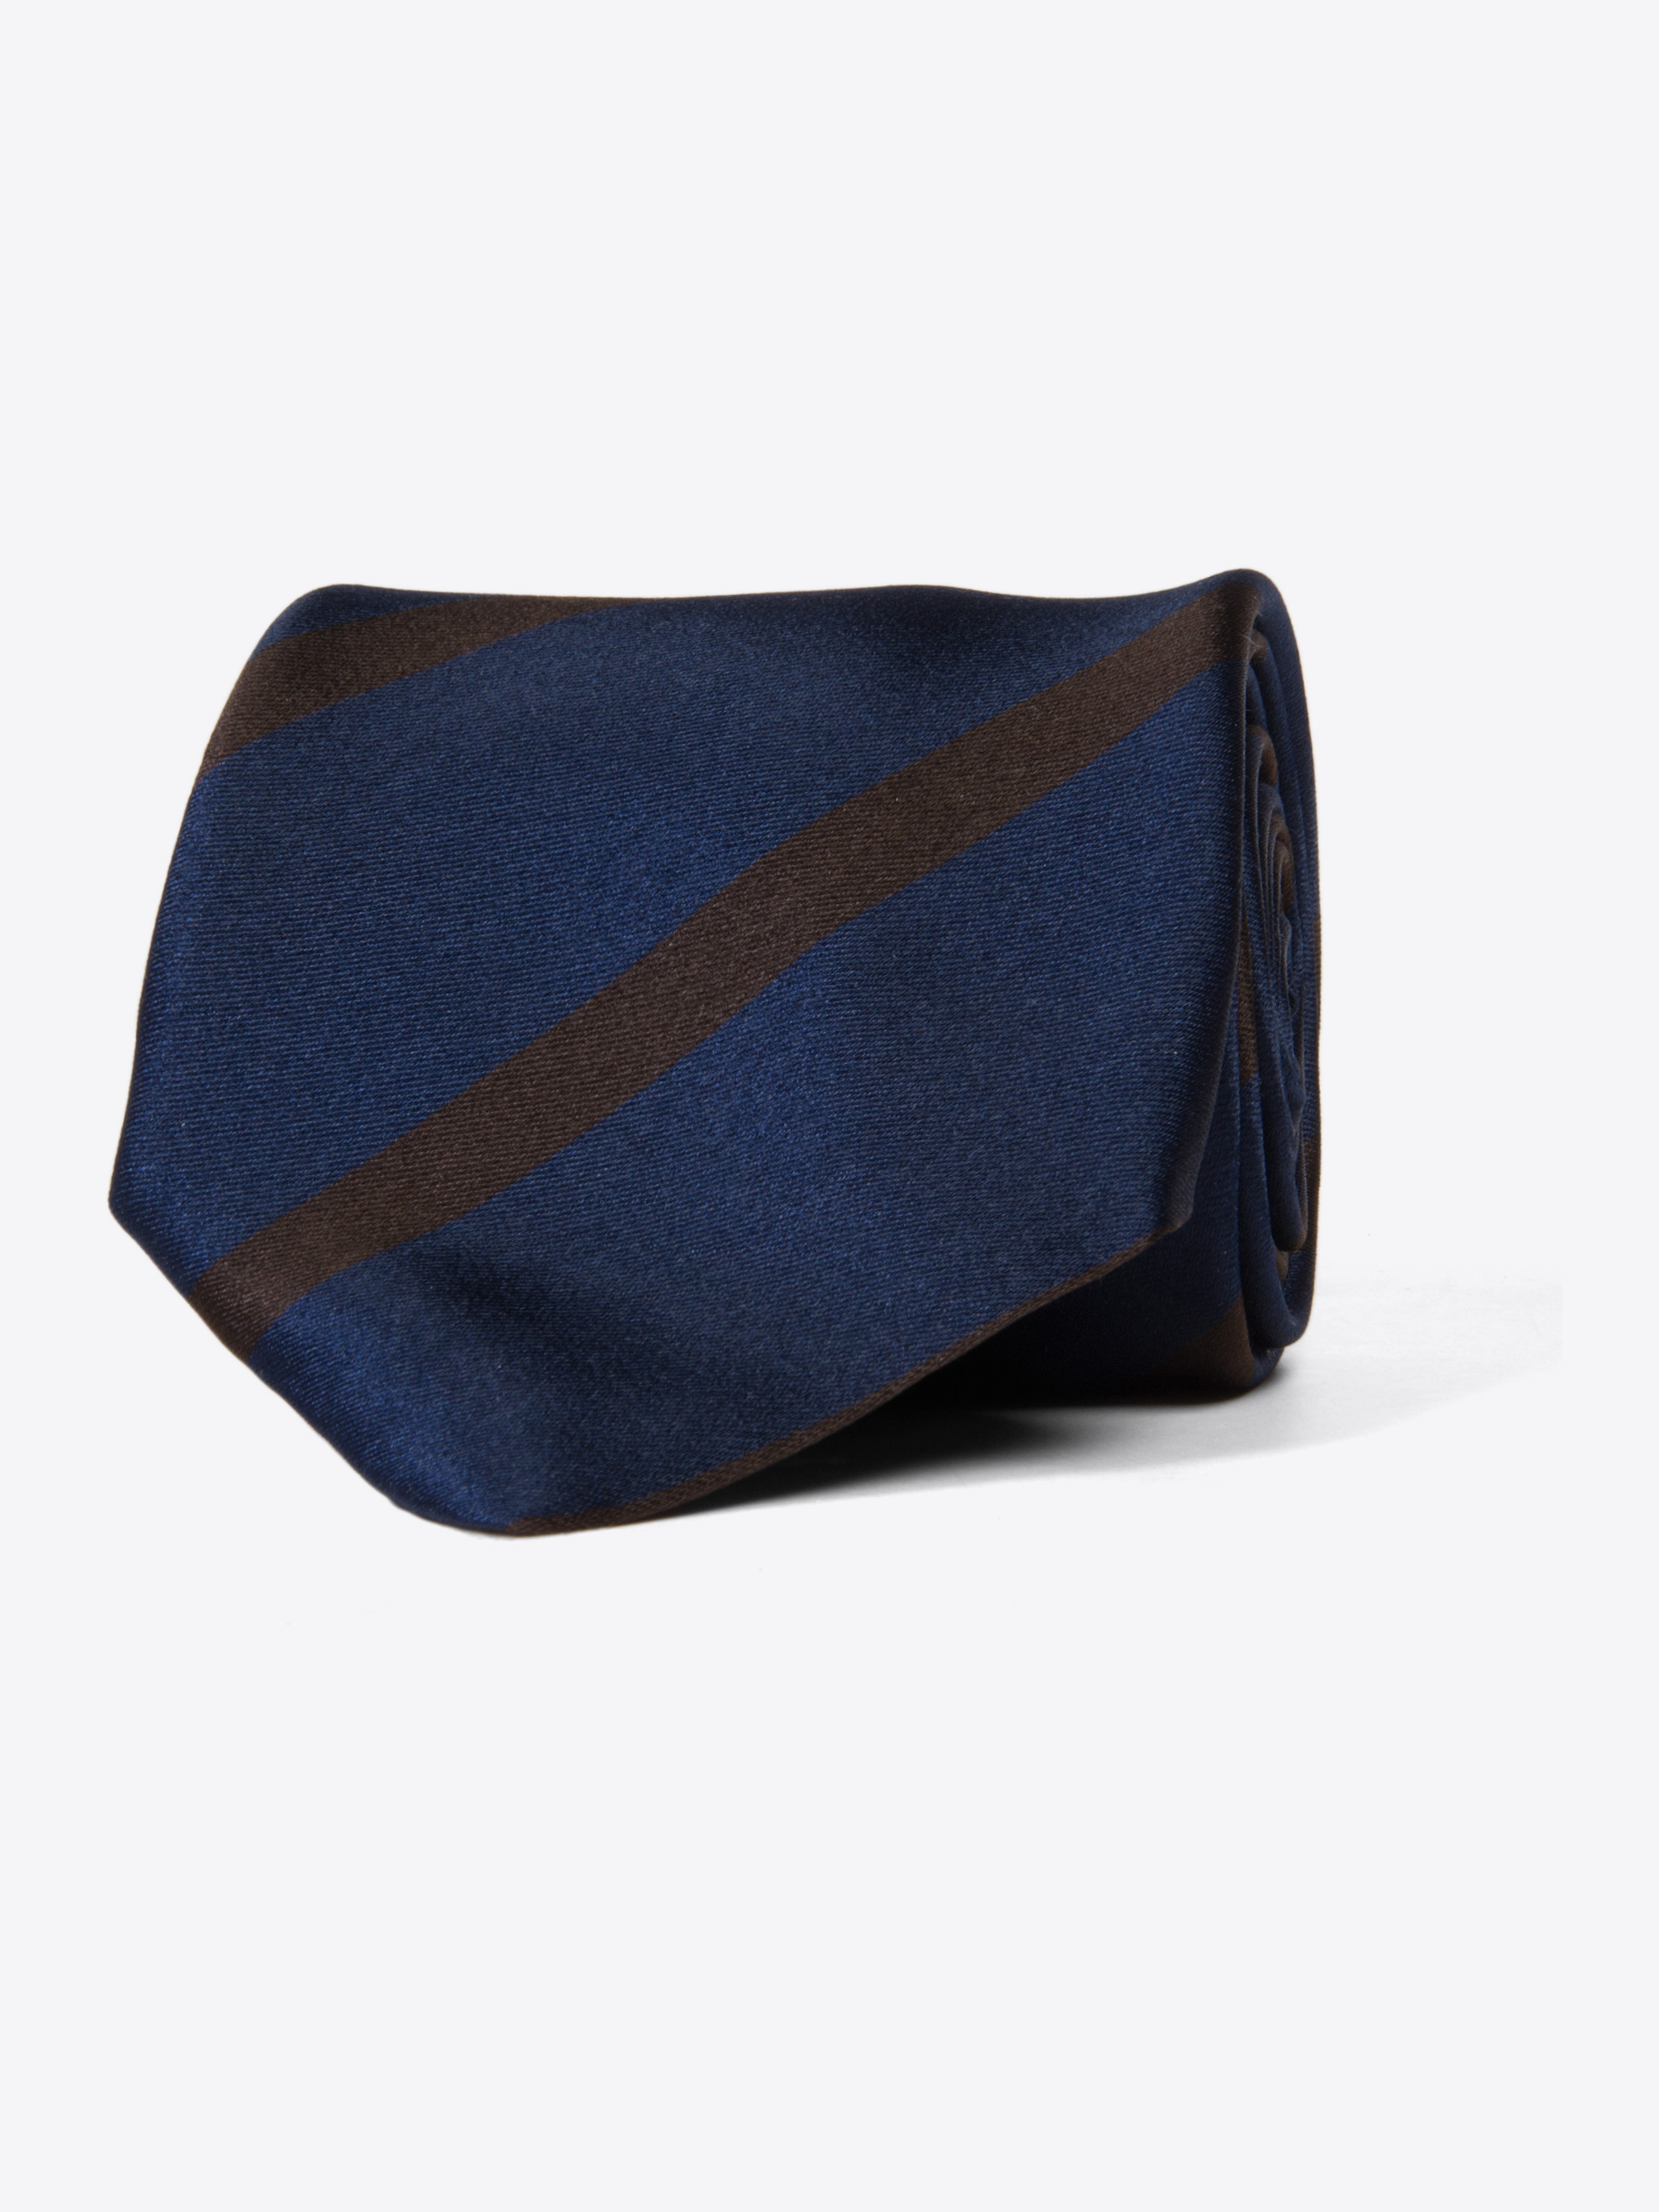 Zoom Image of Navy and Brown Satin Stripe Tie